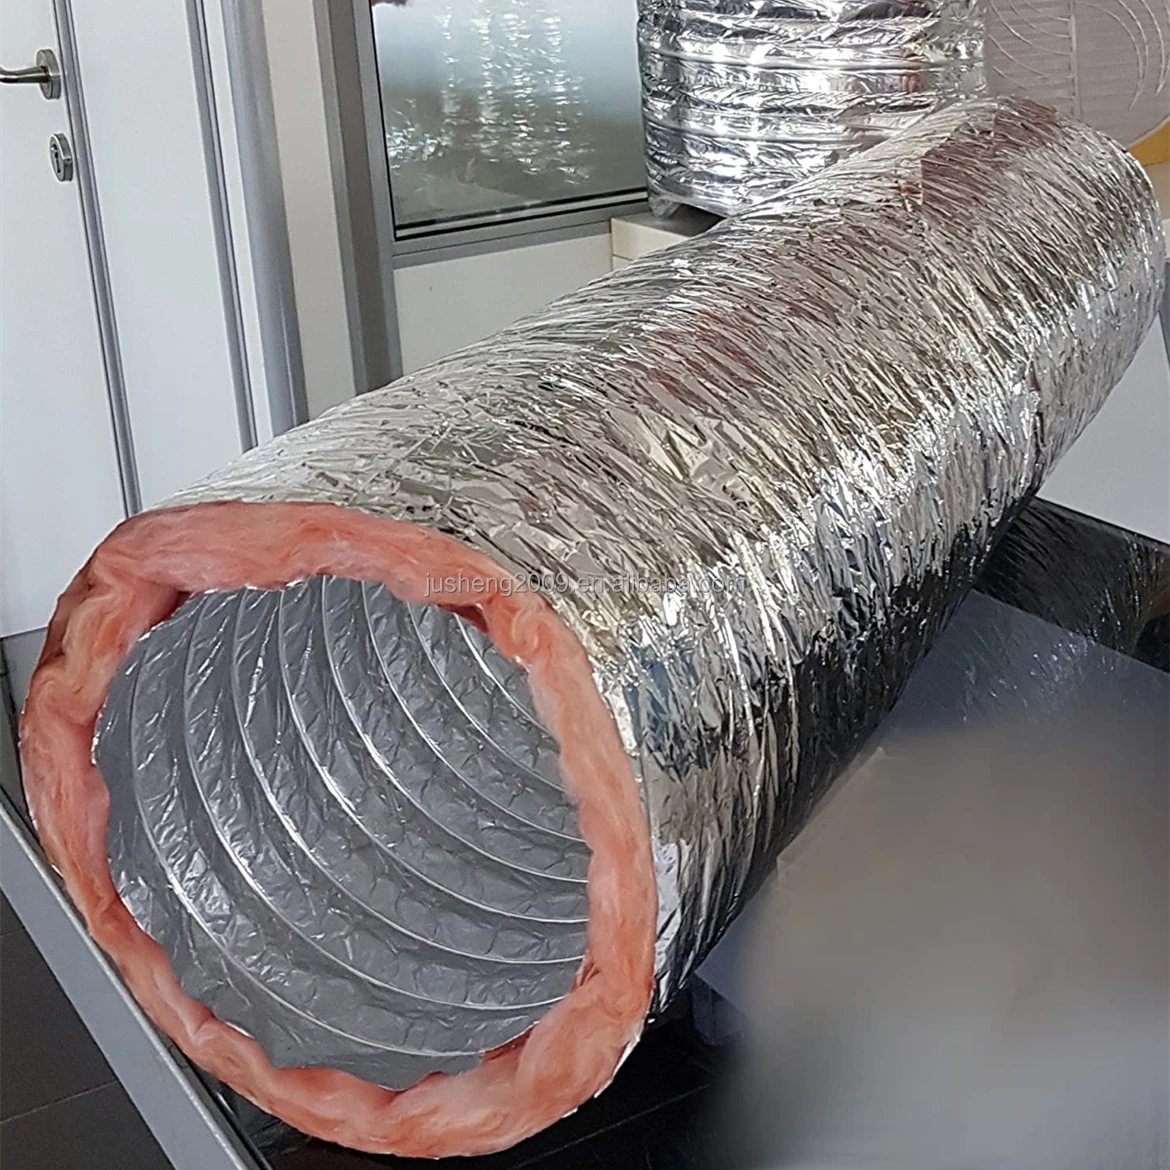 Flexible Duct 25ft And 50ft Bags All Sizes R4r6r8flex Duct All Size Insulated Duct Buy Hose 3877